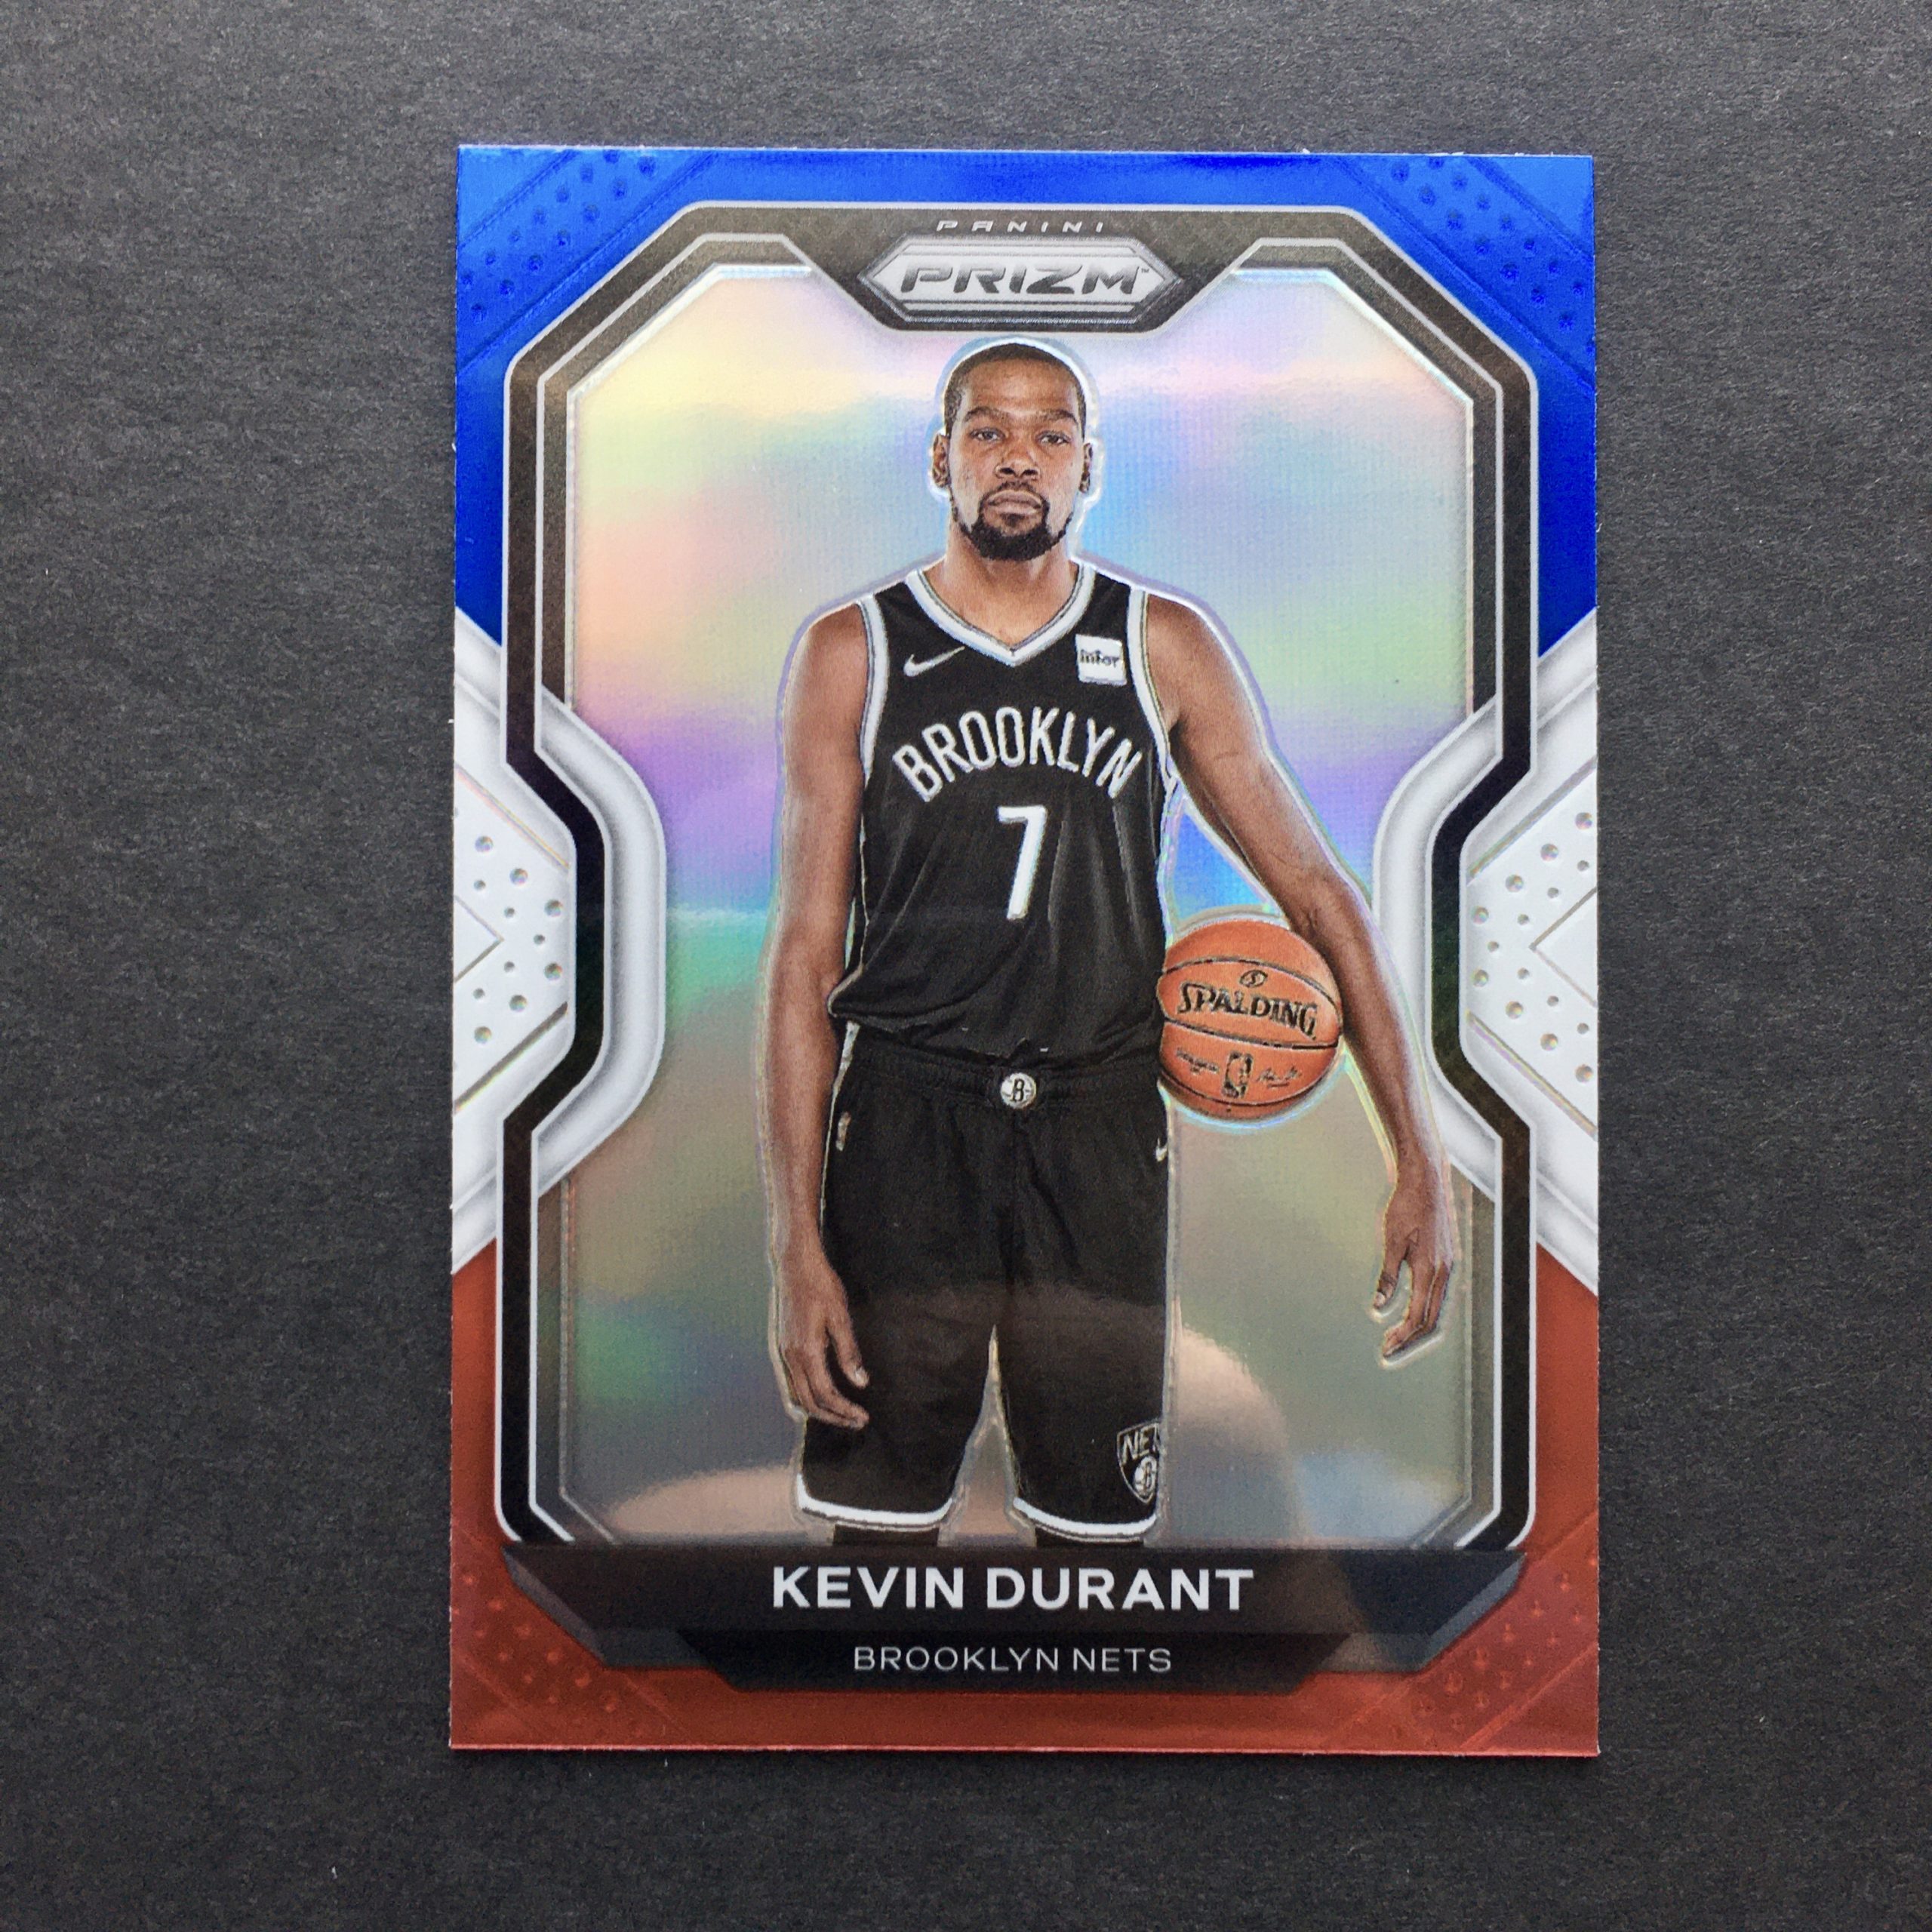 Kevin Durant 2020-21 Prizm Red White Blue Card